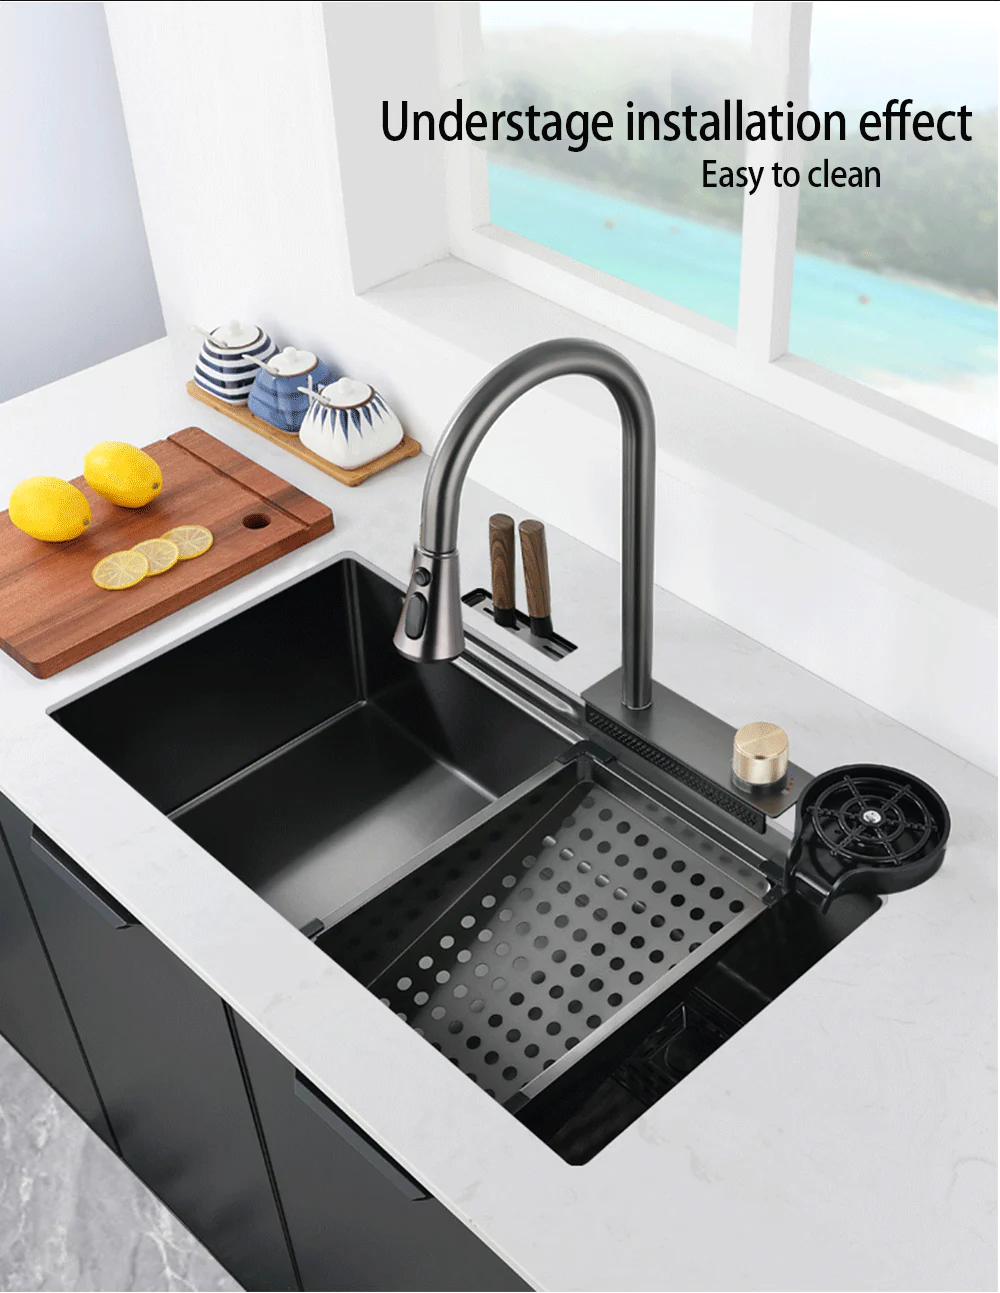 InArt Nano 304 Stainless Steel Single Bowl Handmade Black Color Waterfall Kitchen Sink 30x18 Inches With Faucet Knife Holder Drain Basket - InArt-Studio